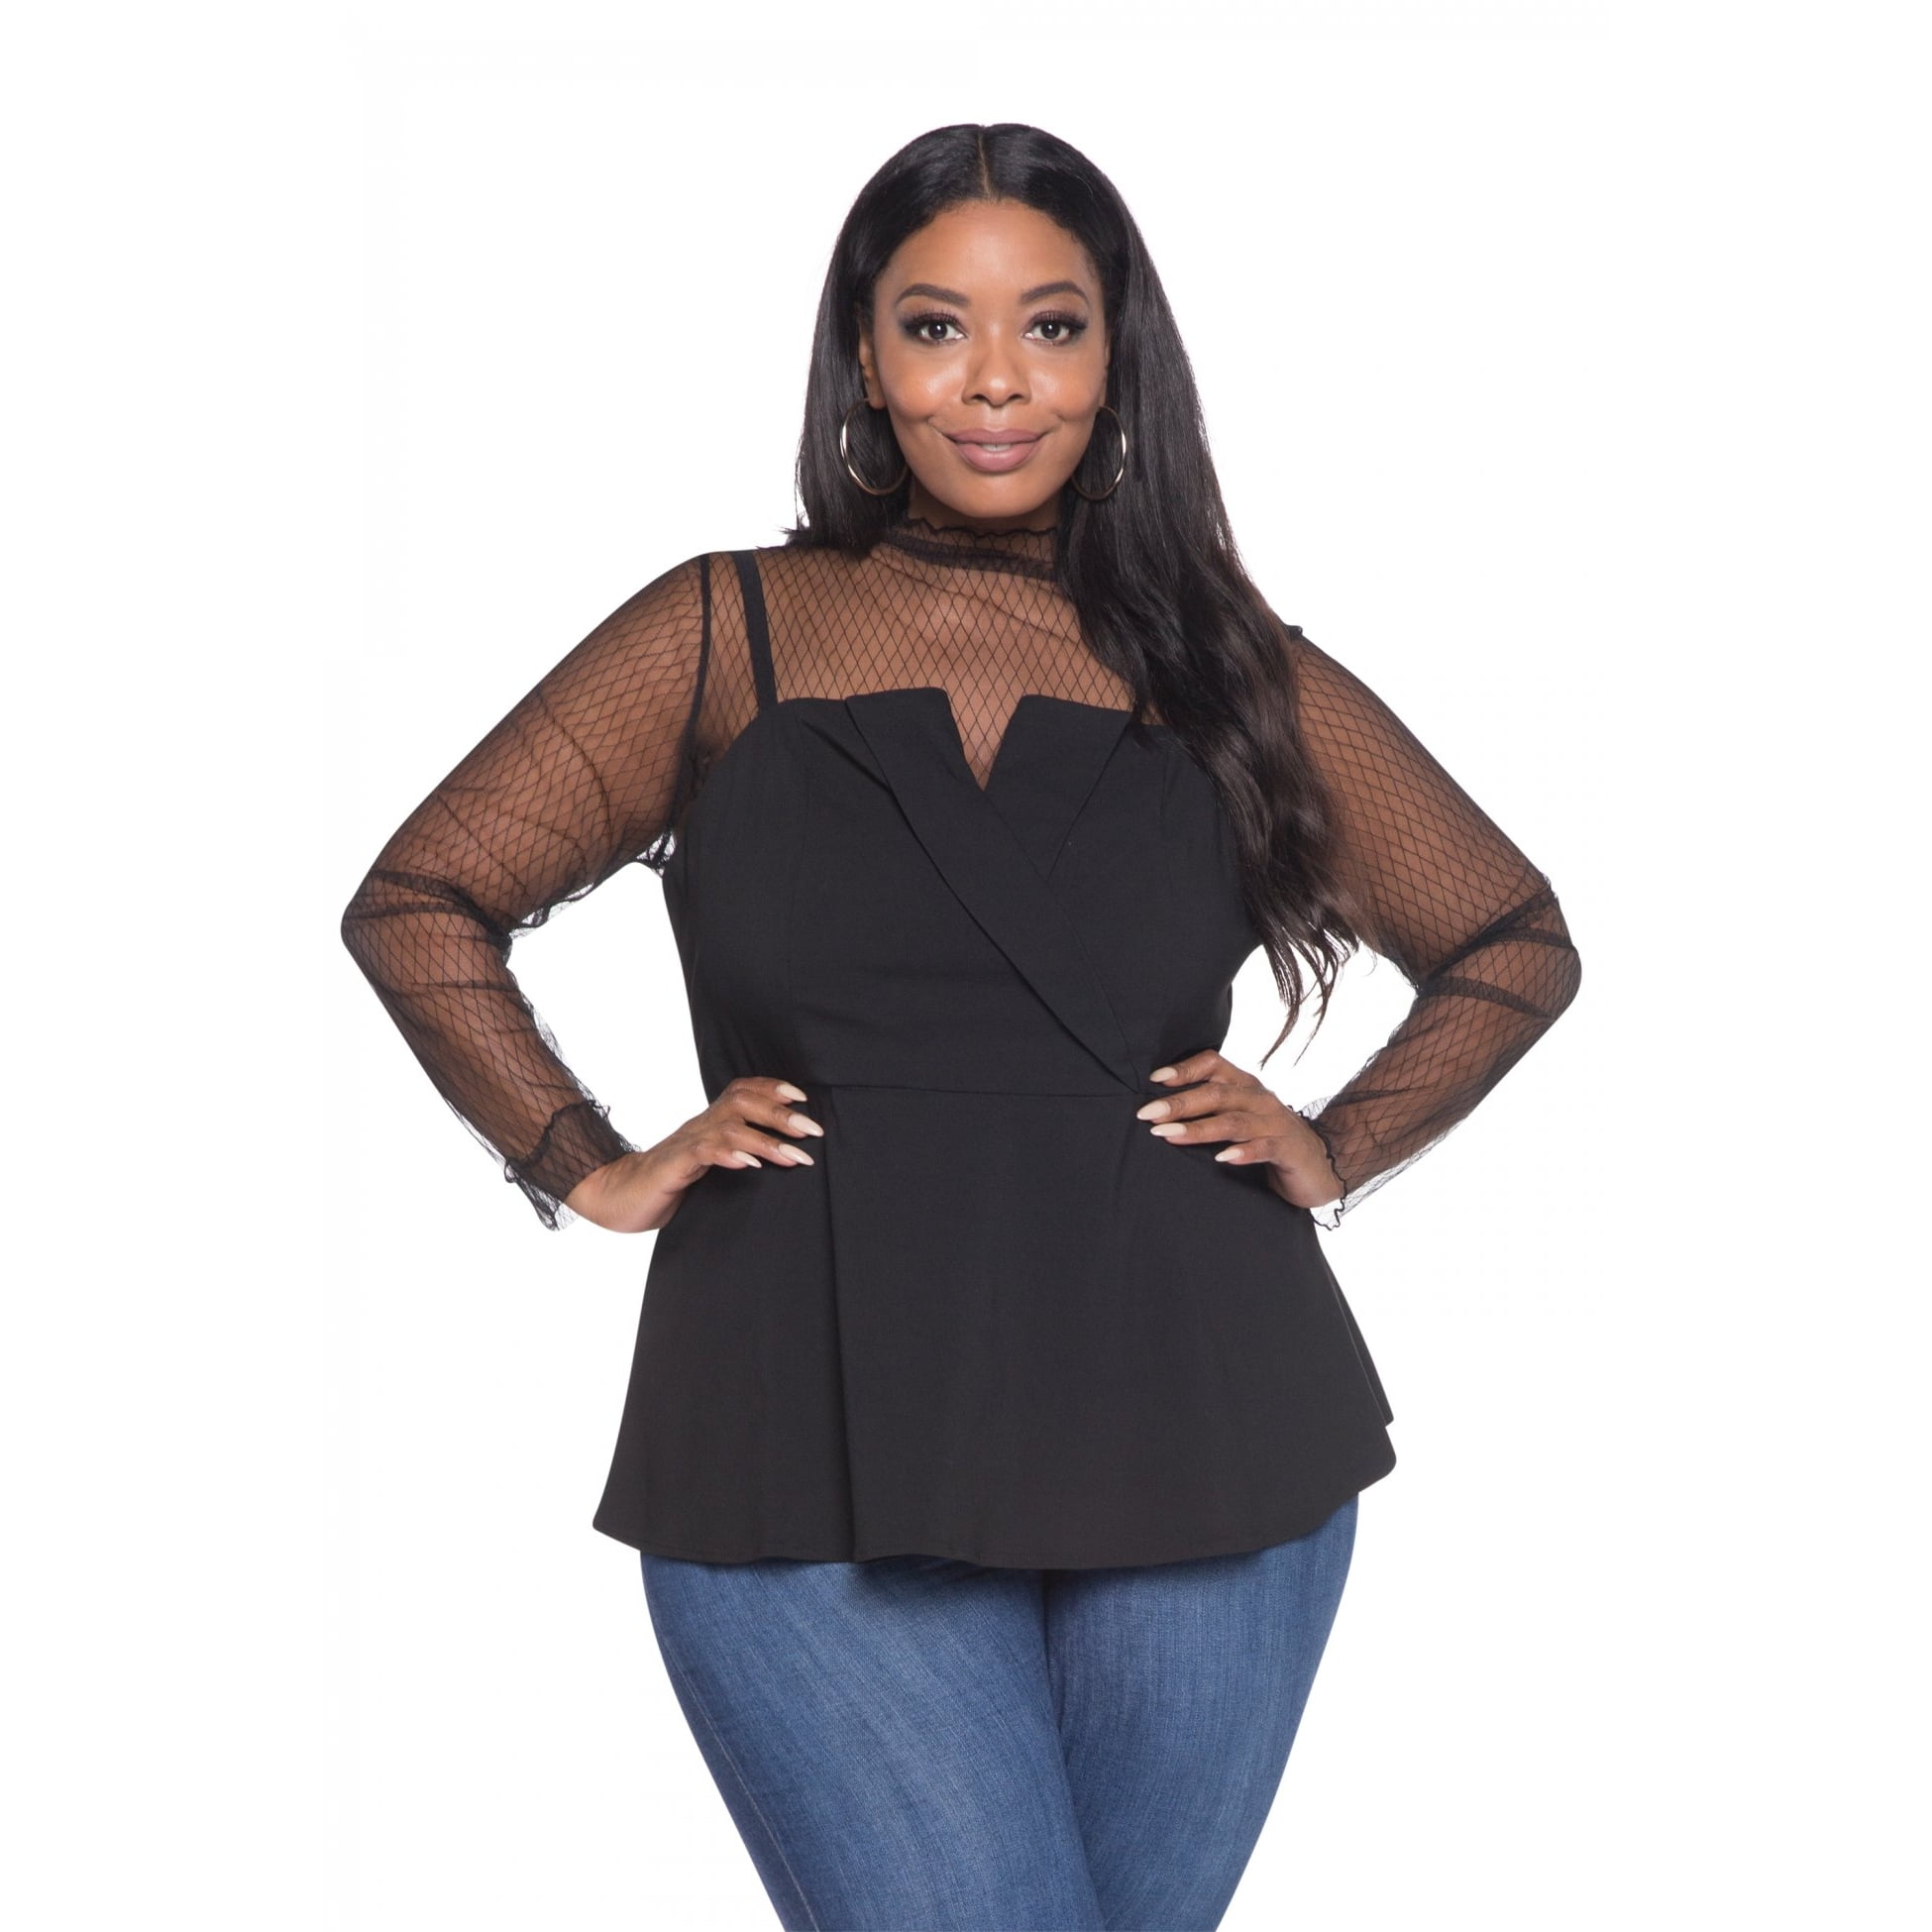 plus size sexy tops